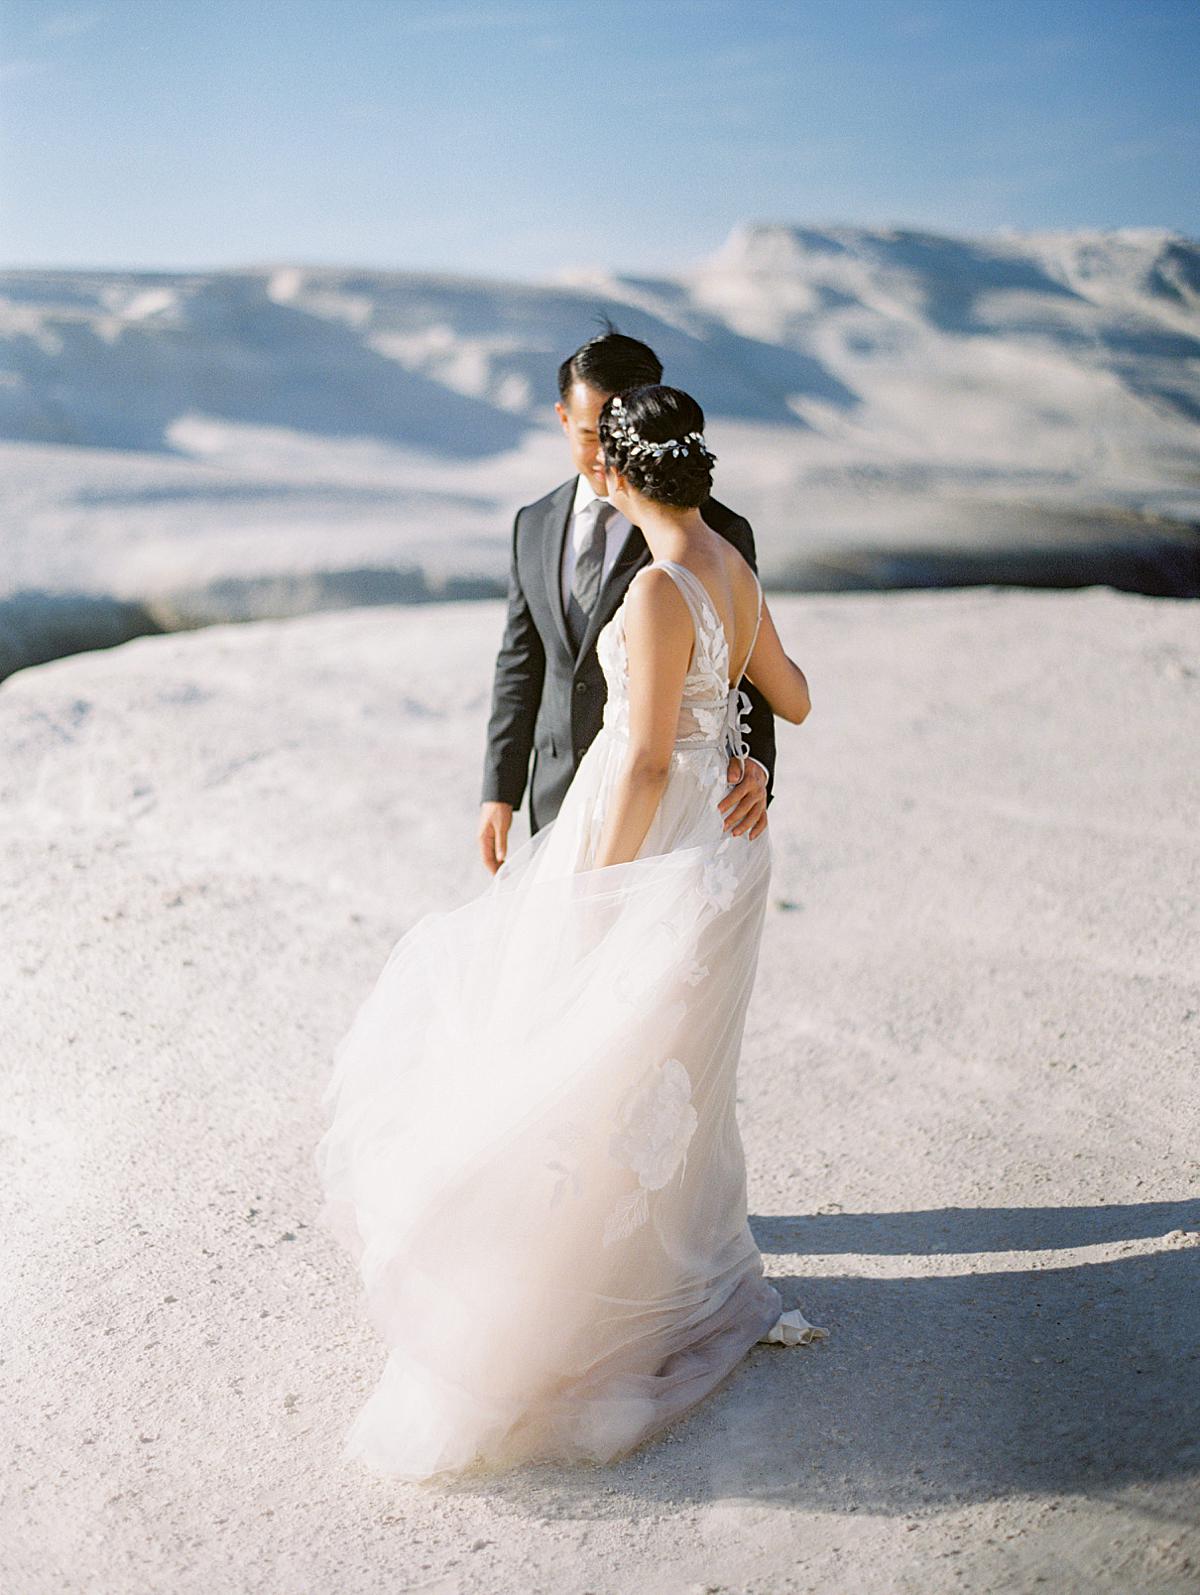 Bride and groom during their first look session in Milos island Greece